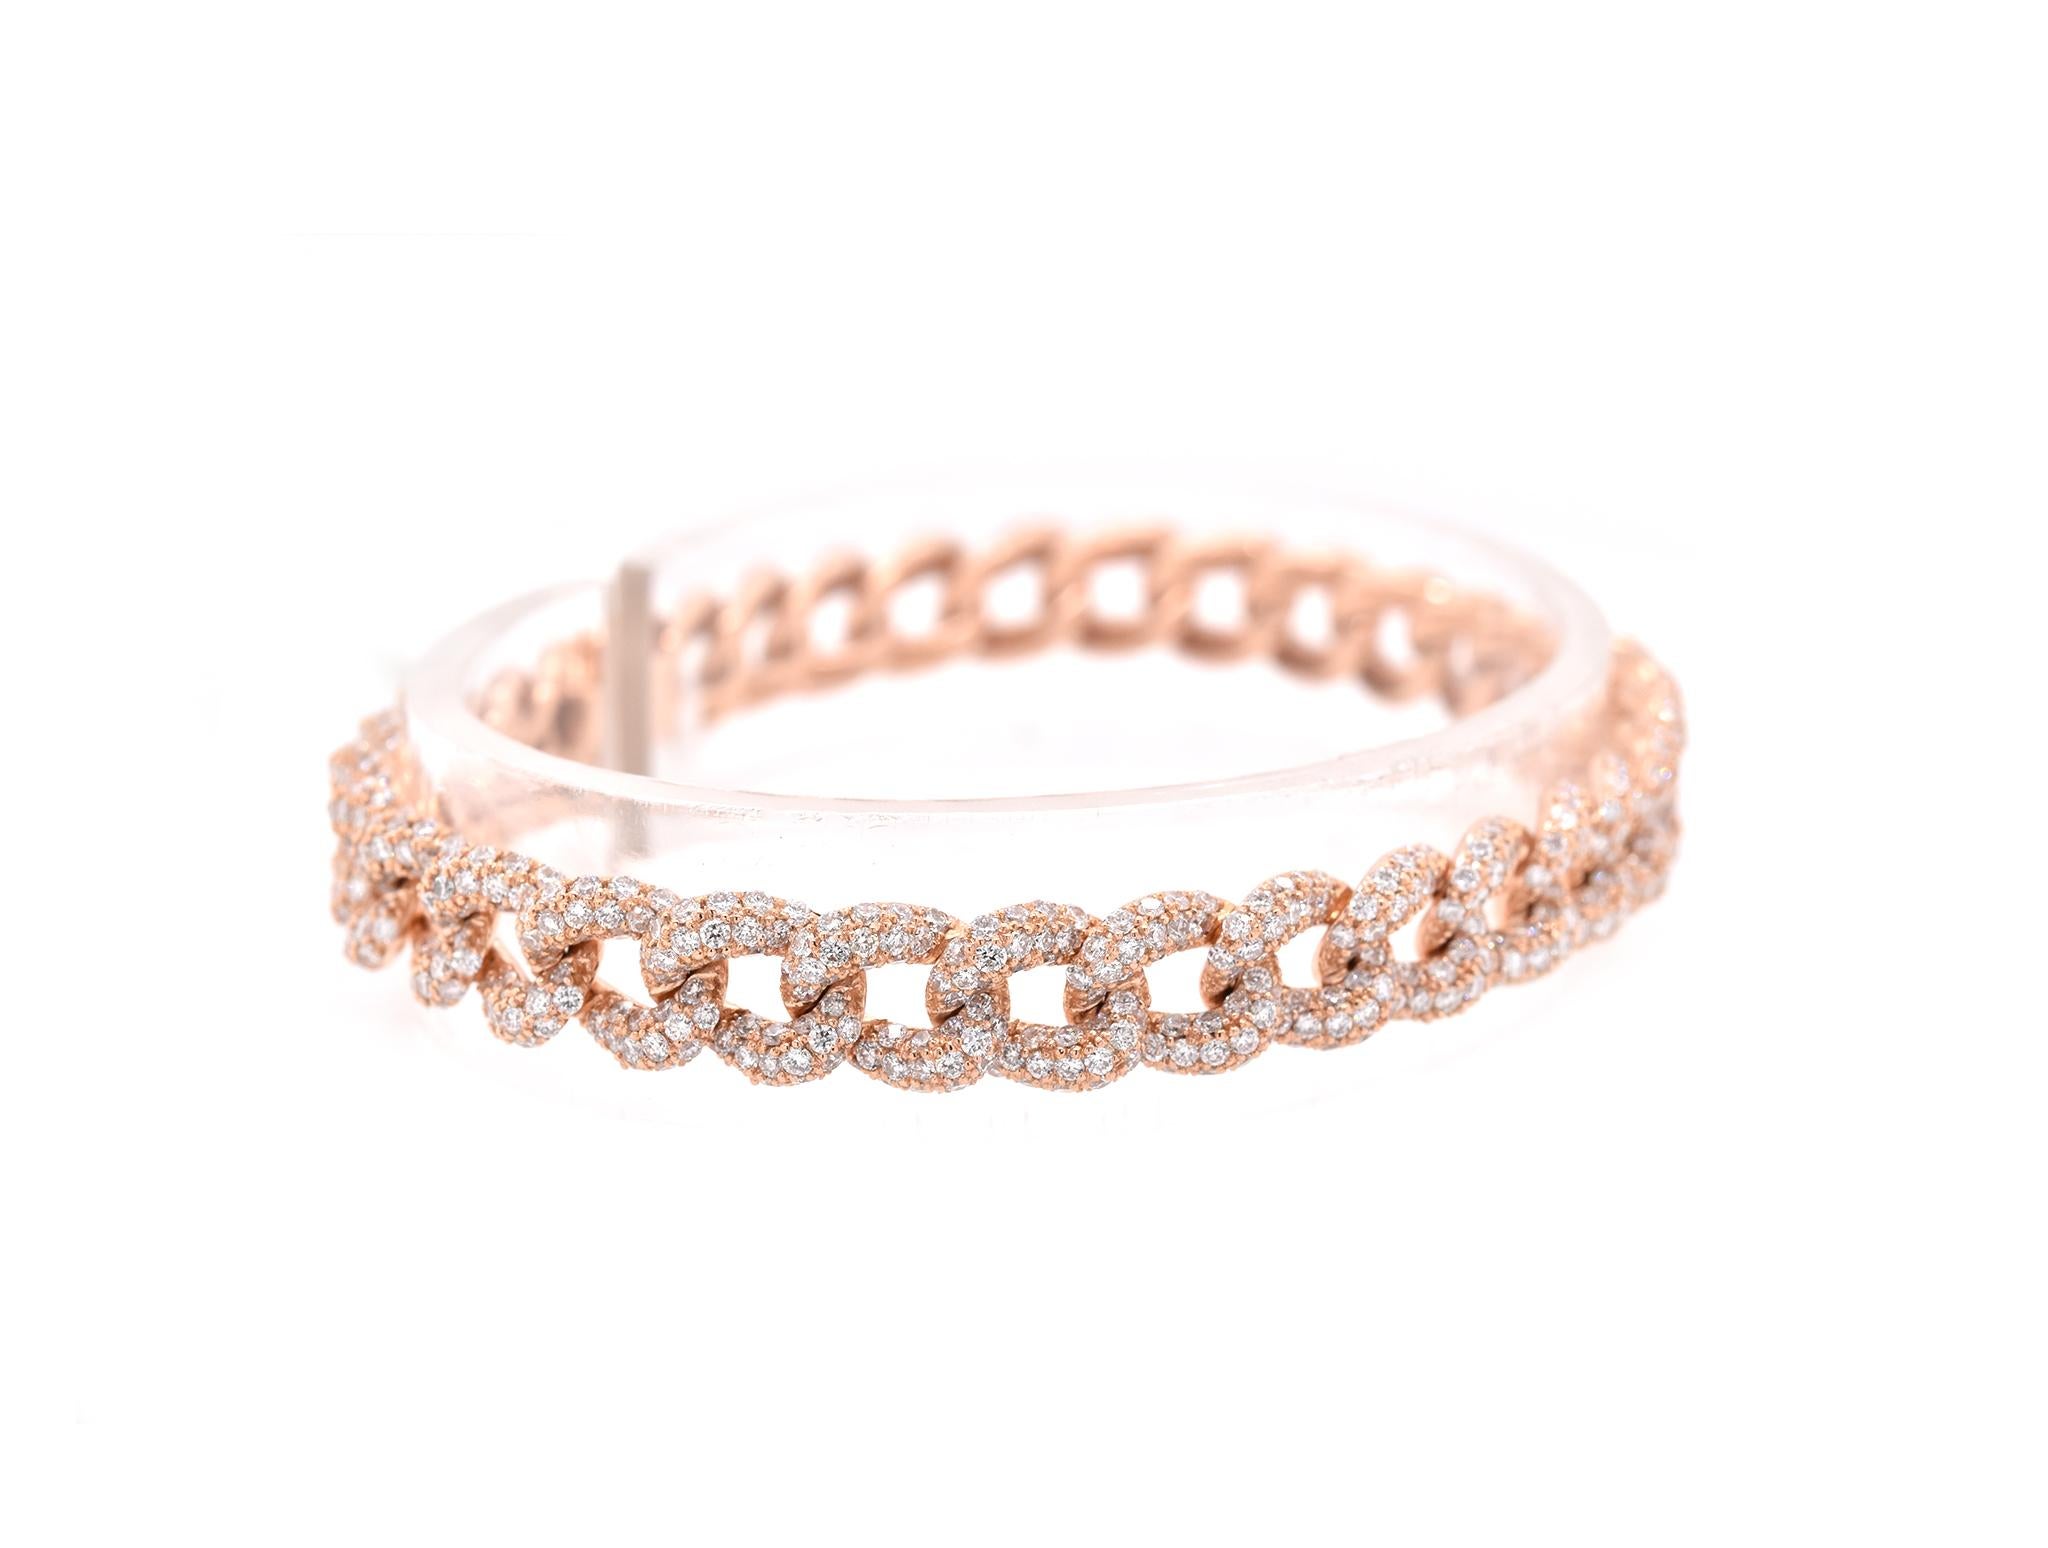 Material: 18k rose gold
Diamonds: 1043 round brilliant cuts = 6.36cttw
Color: G
Clarity: VS
Dimensions: bracelet measures 7-inches in length
Weight: 18.65 grams
